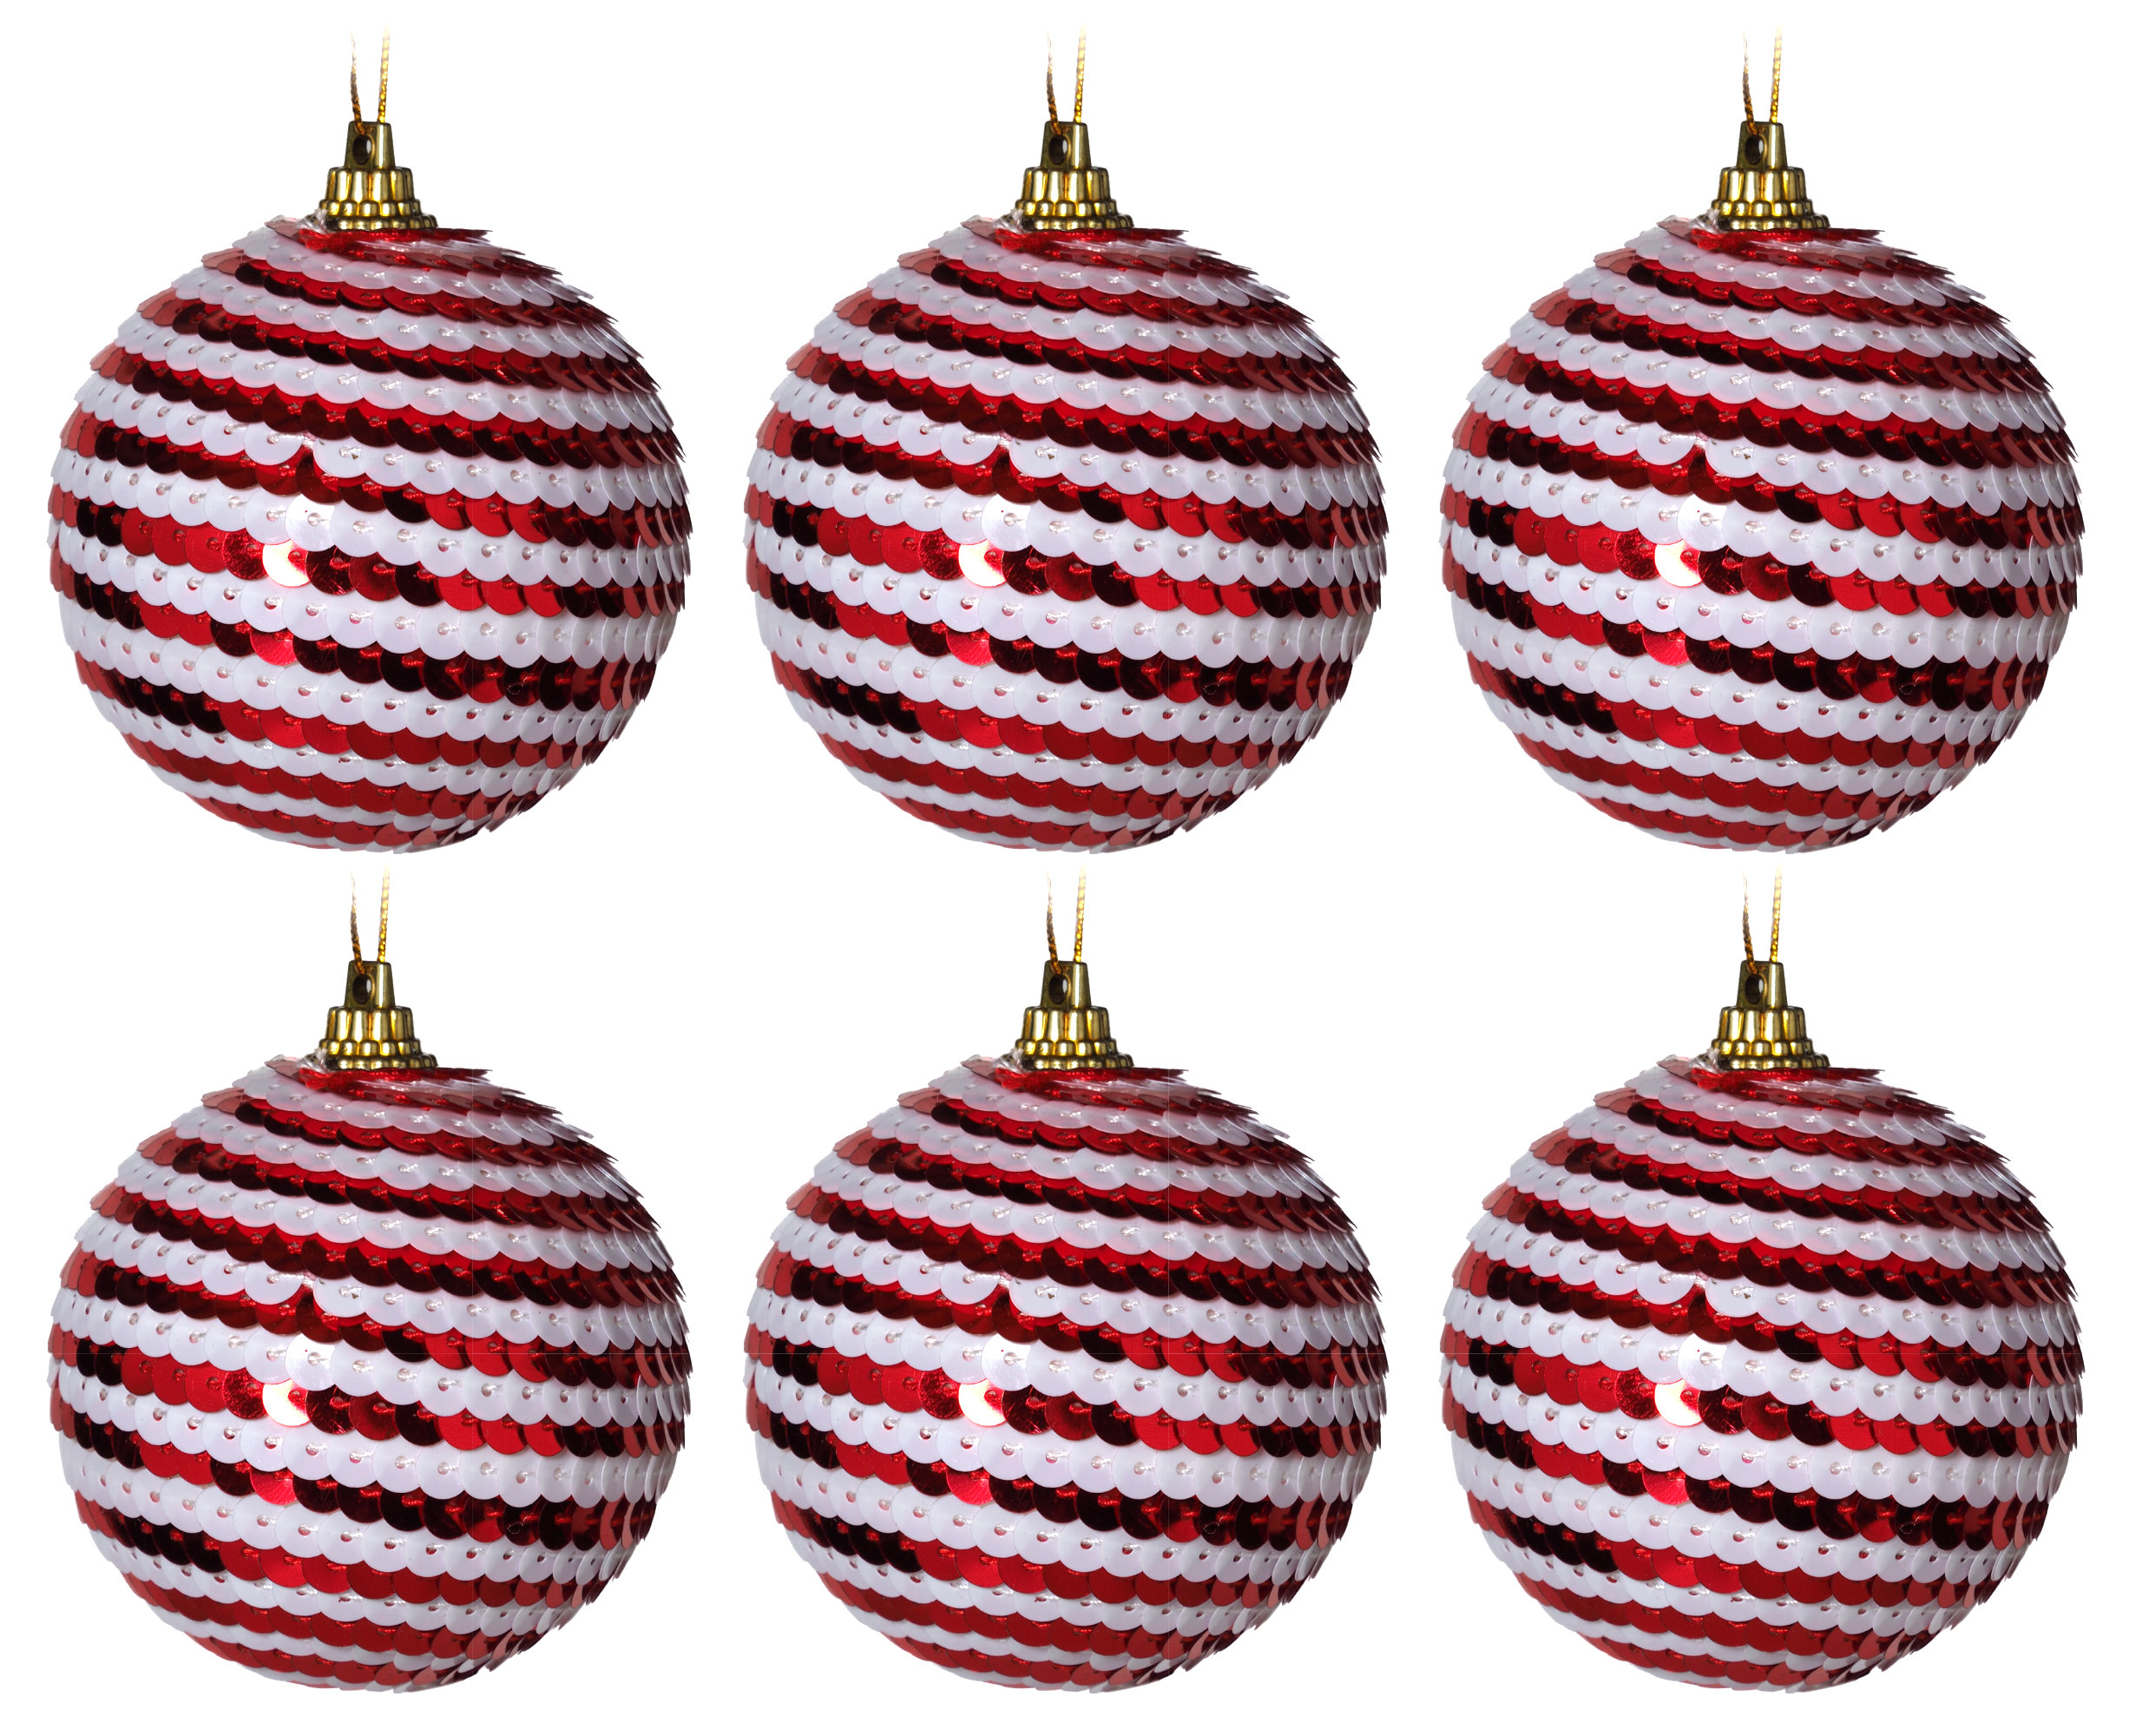 Round Swirl Sequin Christmas Tree Baubles - Red White Candy Cane - Set of 6